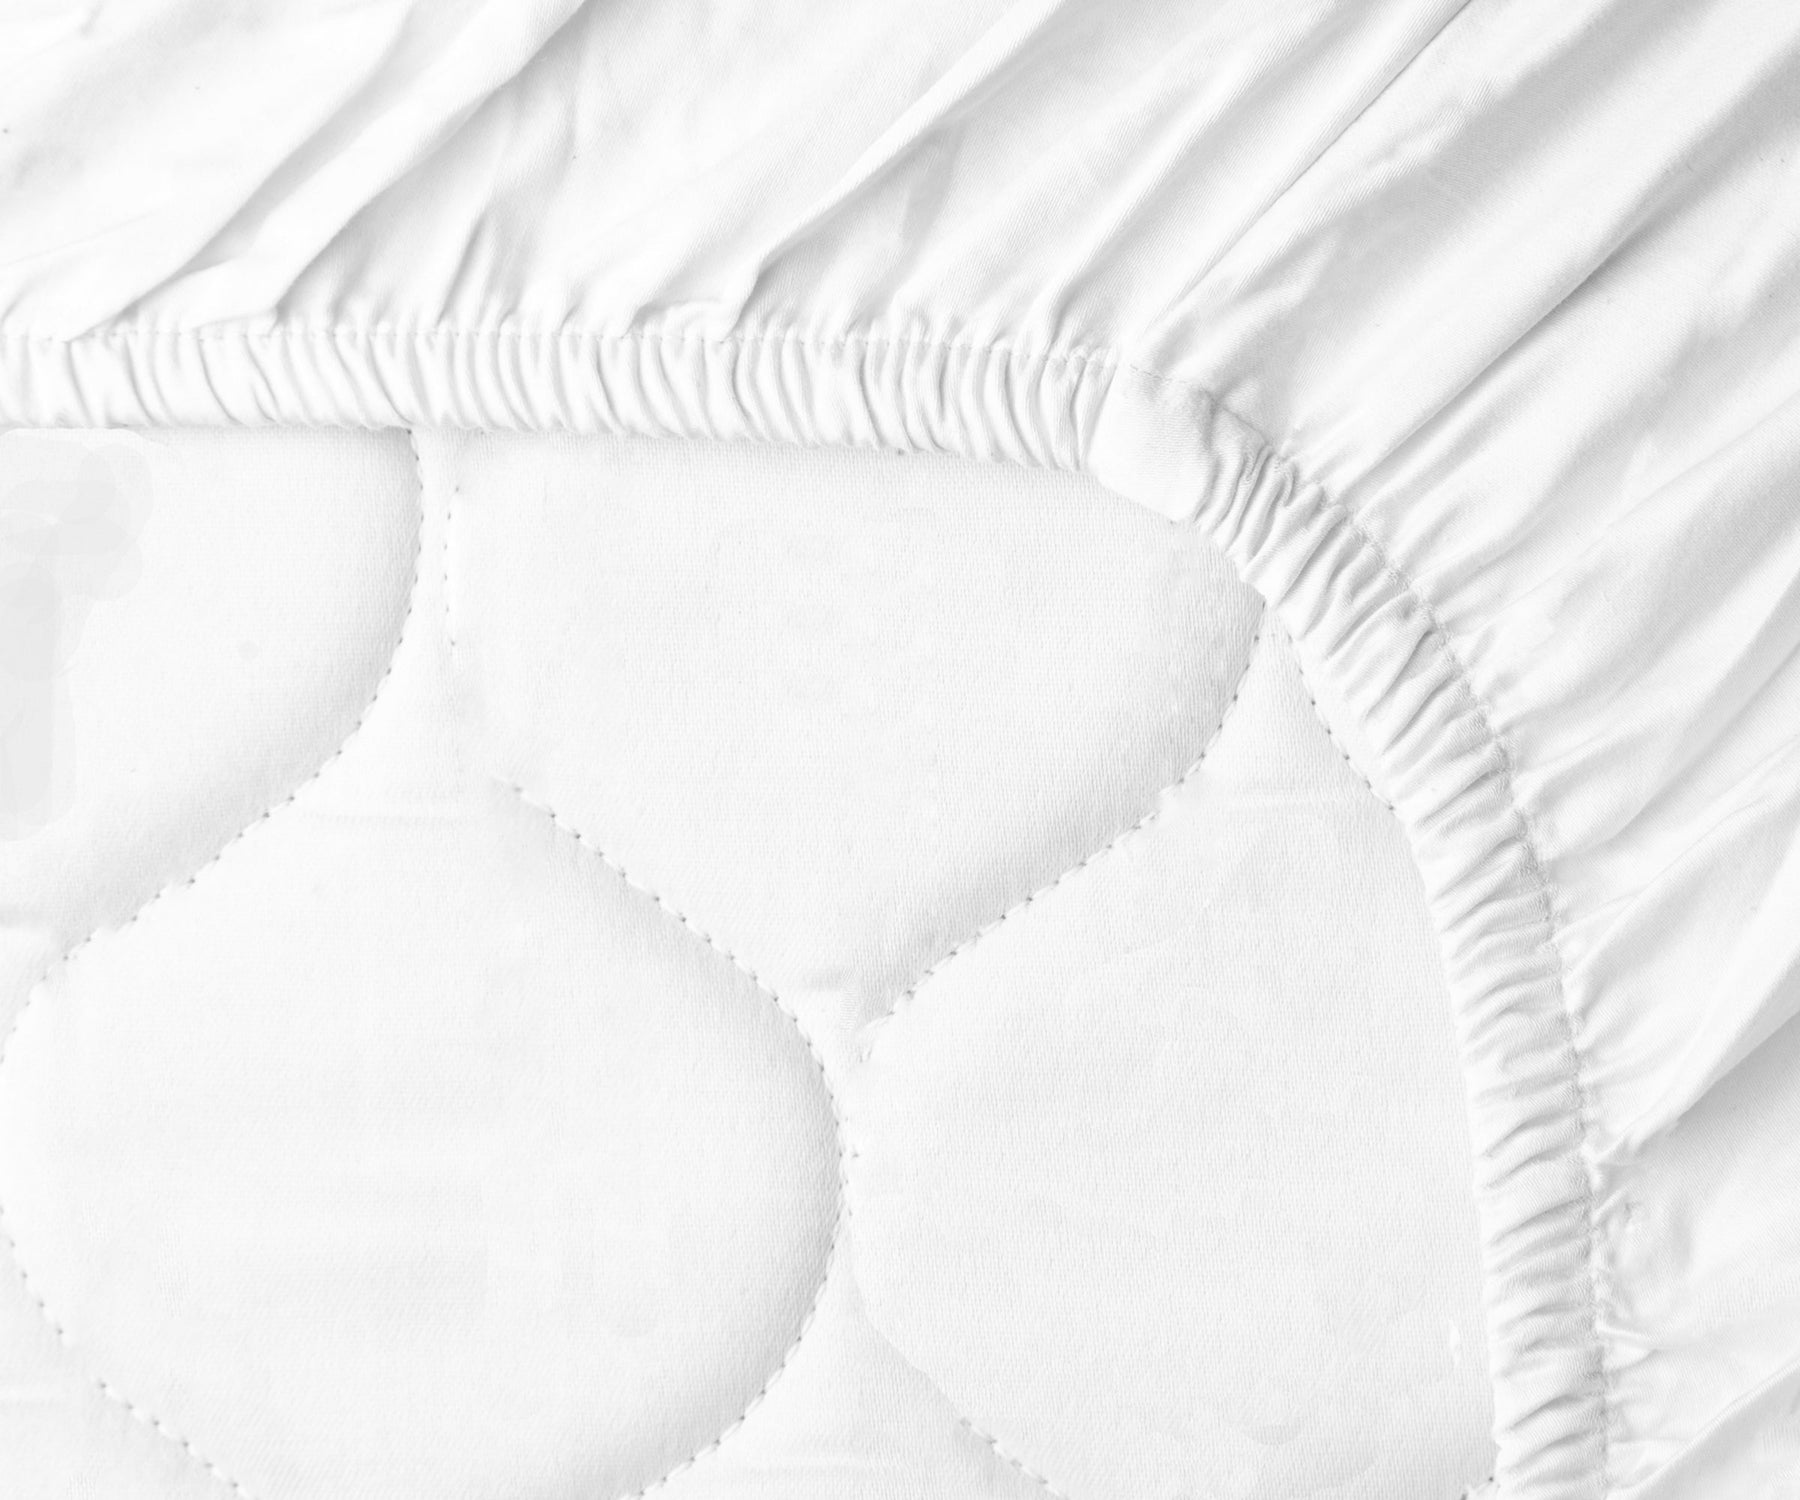 Flourish Fitted Sheet, King, 78x80x12, White, Fitted Sheets, Sheets, Bed  and Bath Linens, Open Catalog